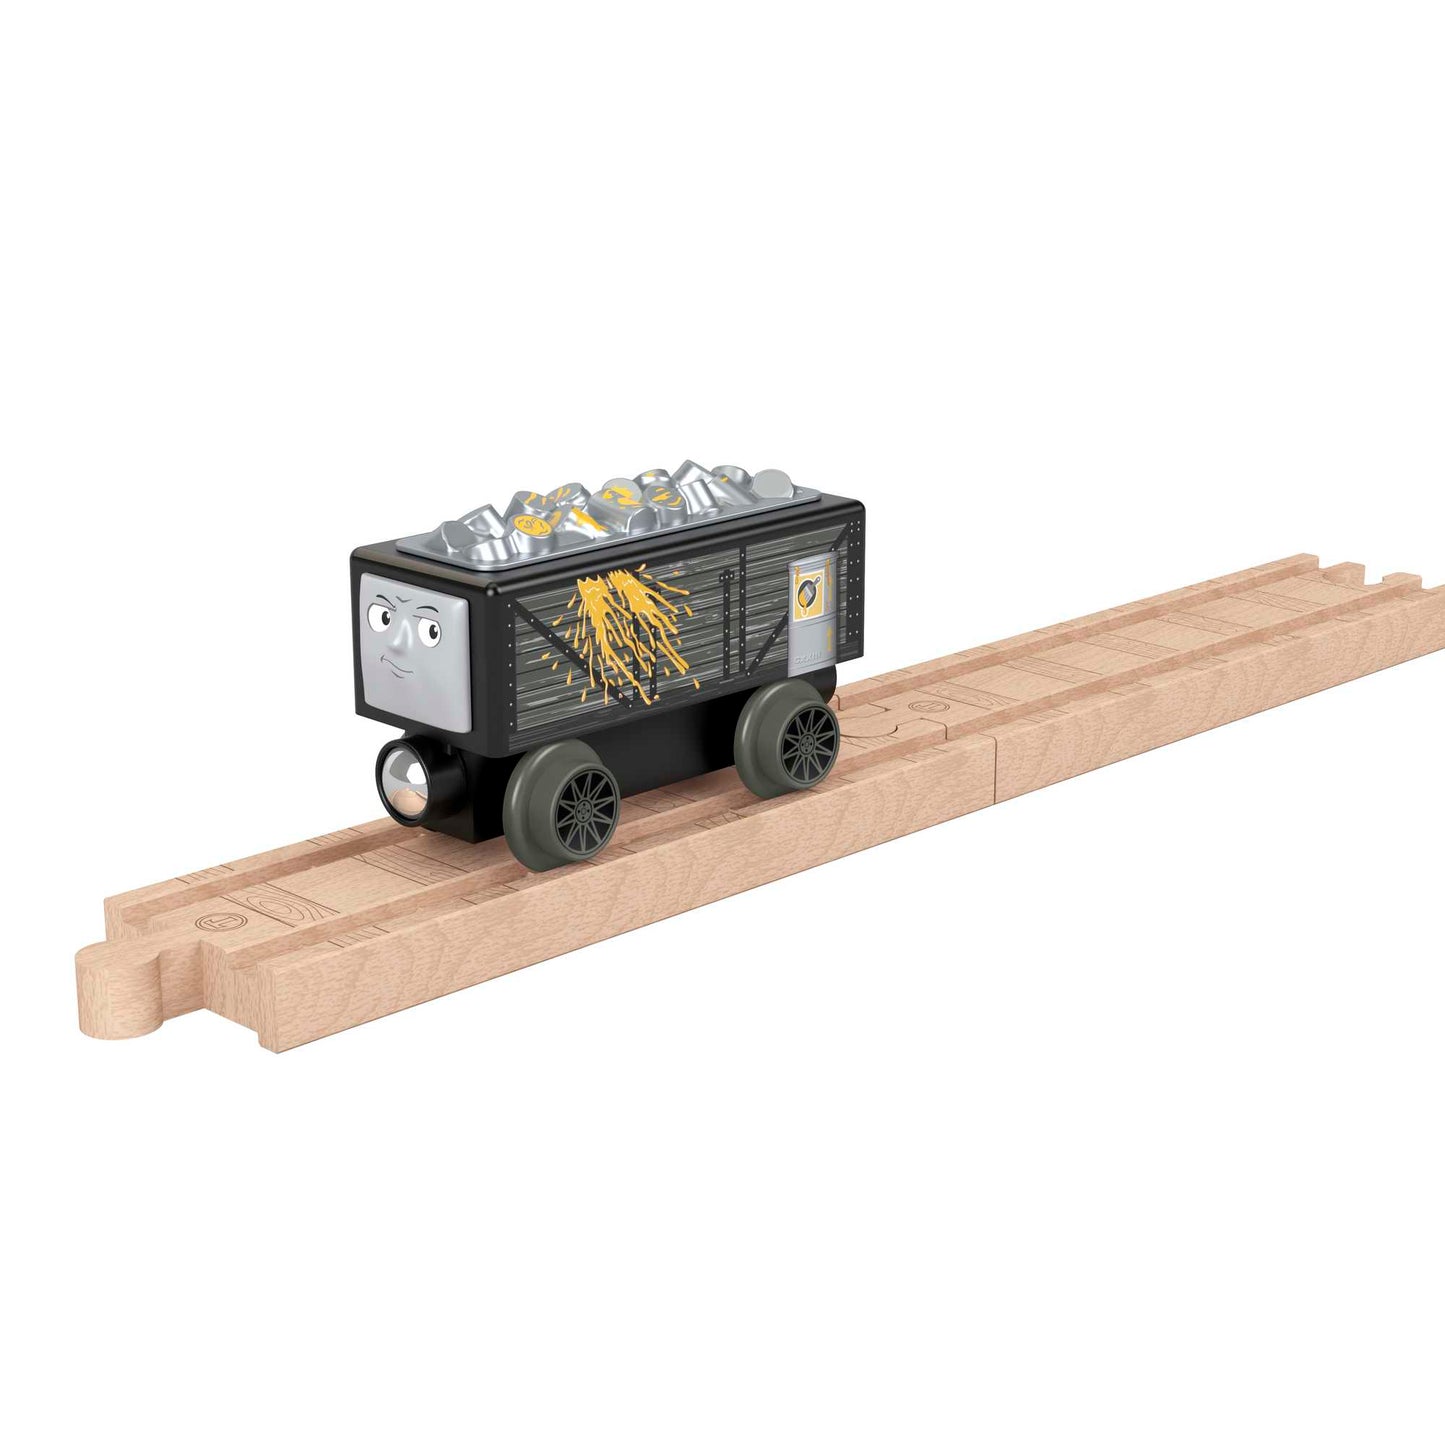 *RECALLED* Fisher-Price Thomas & Friends Wooden Railway Troublesome Truck & Paint